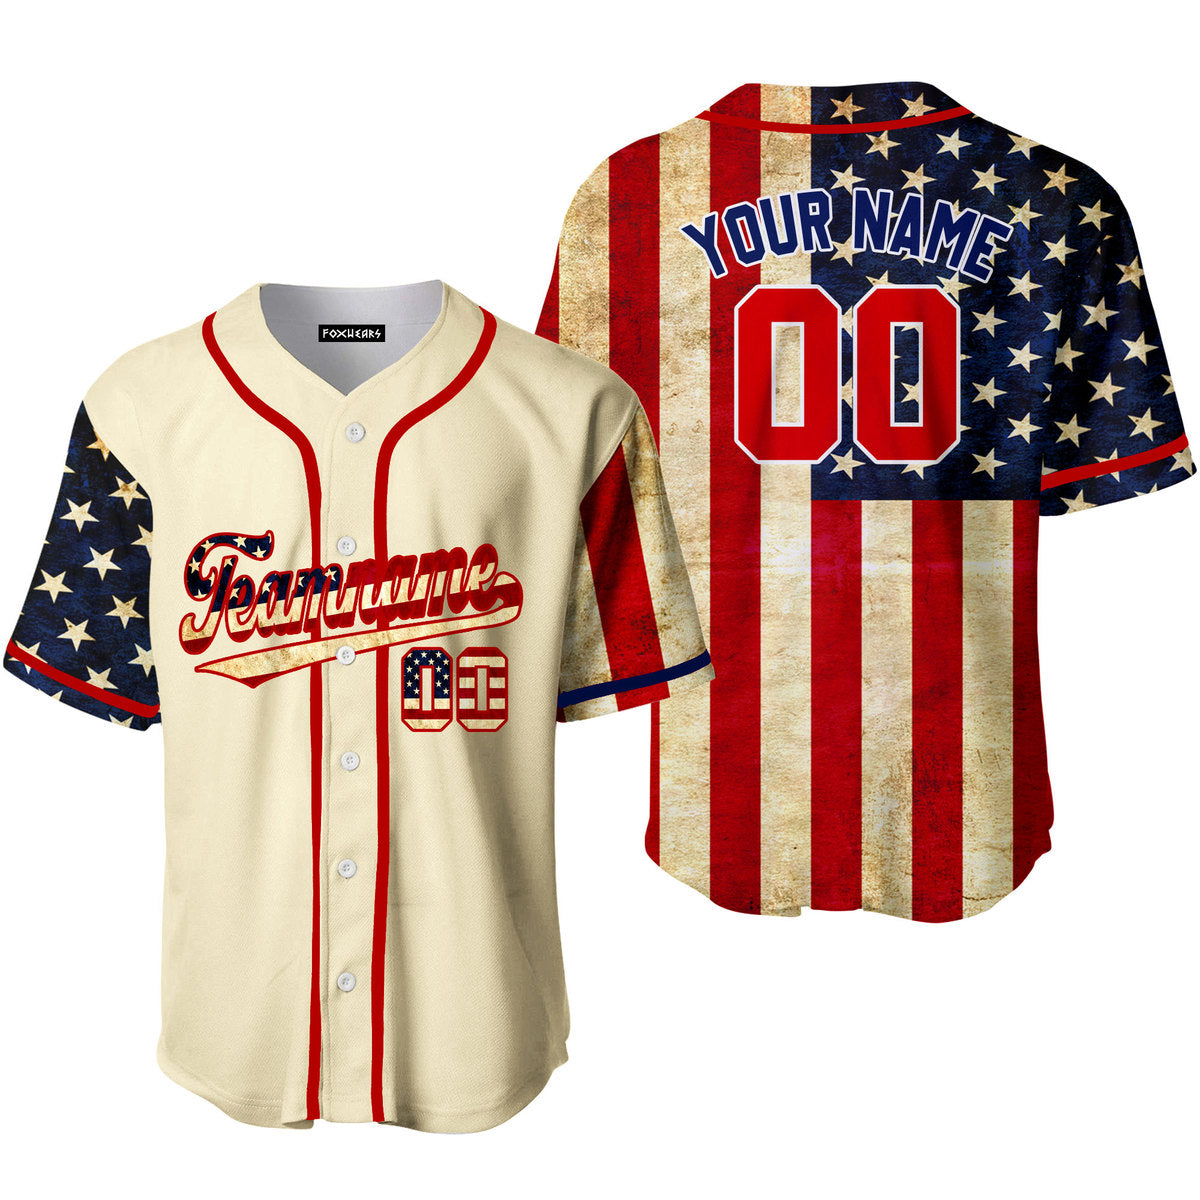 Personalized Cream, Blue And Red USA Flag Baseball Tee Jersey